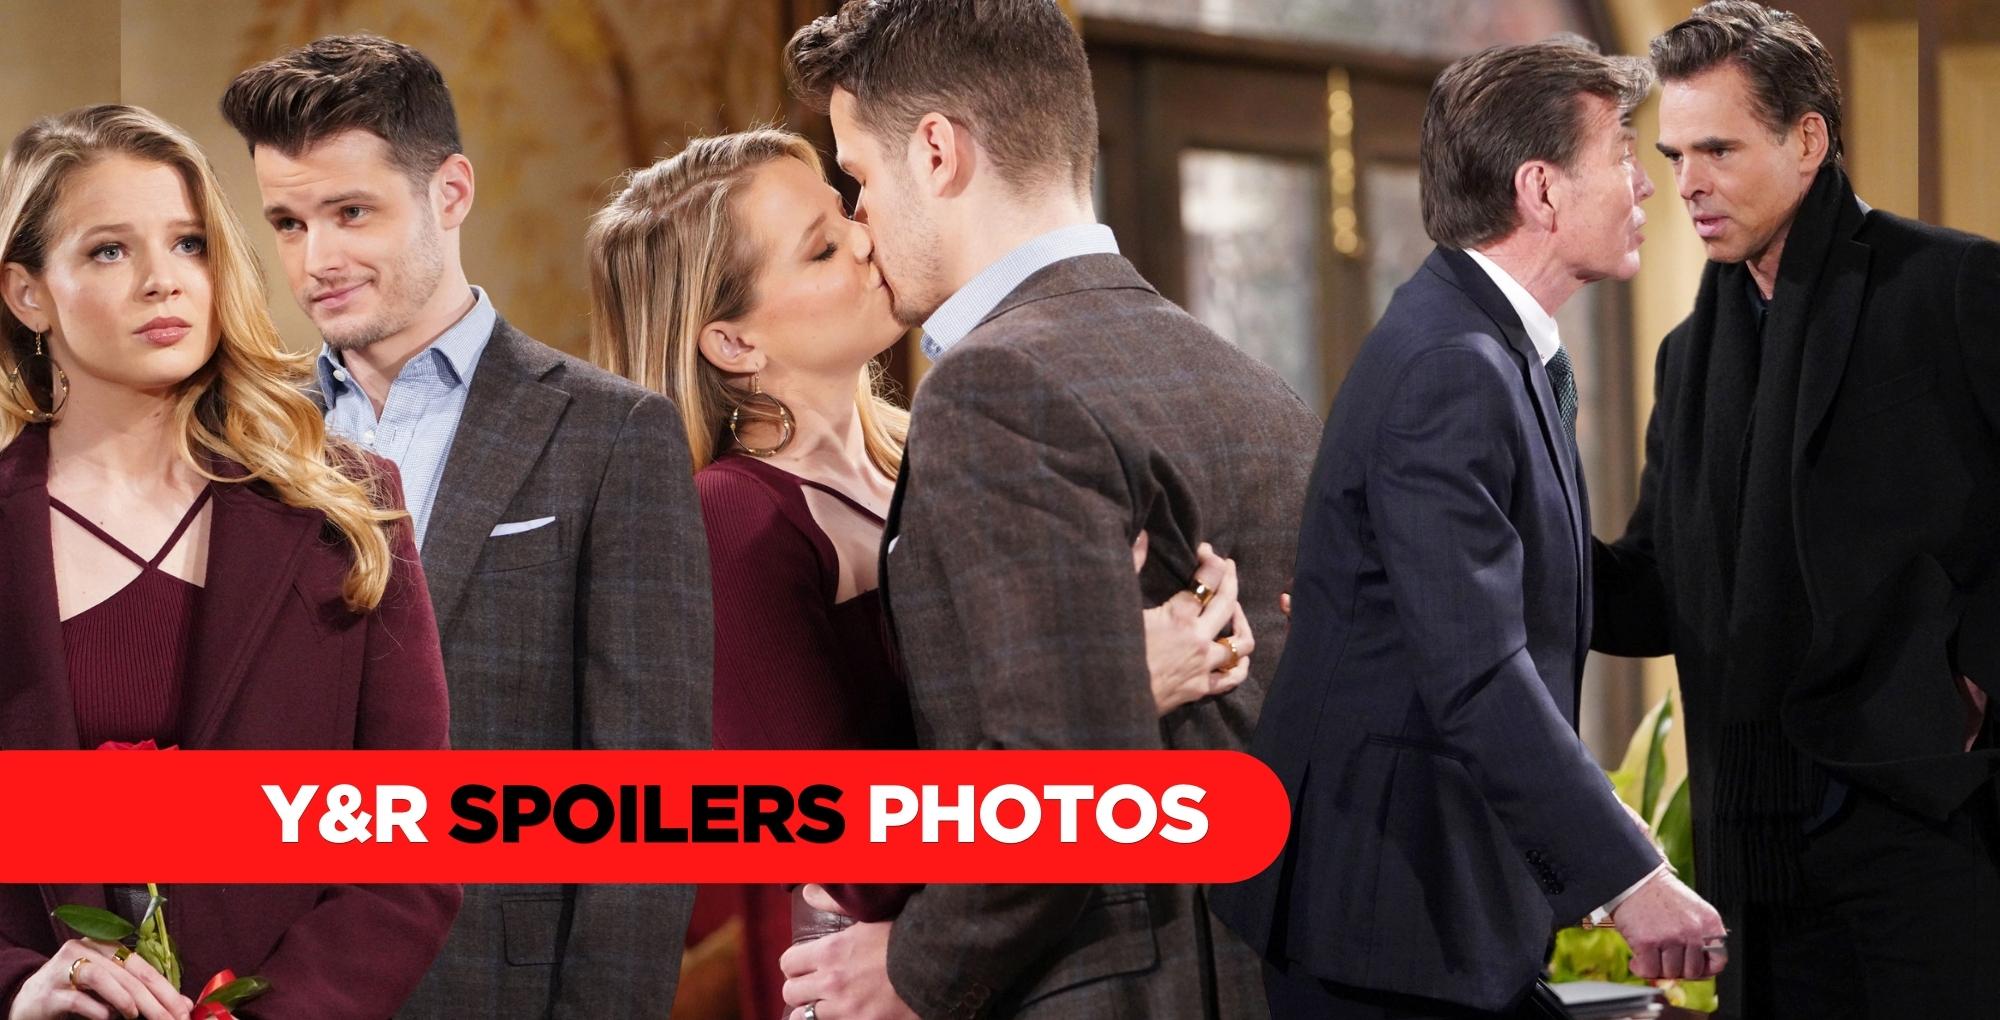 y&r spoilers photos for thursday, february 23